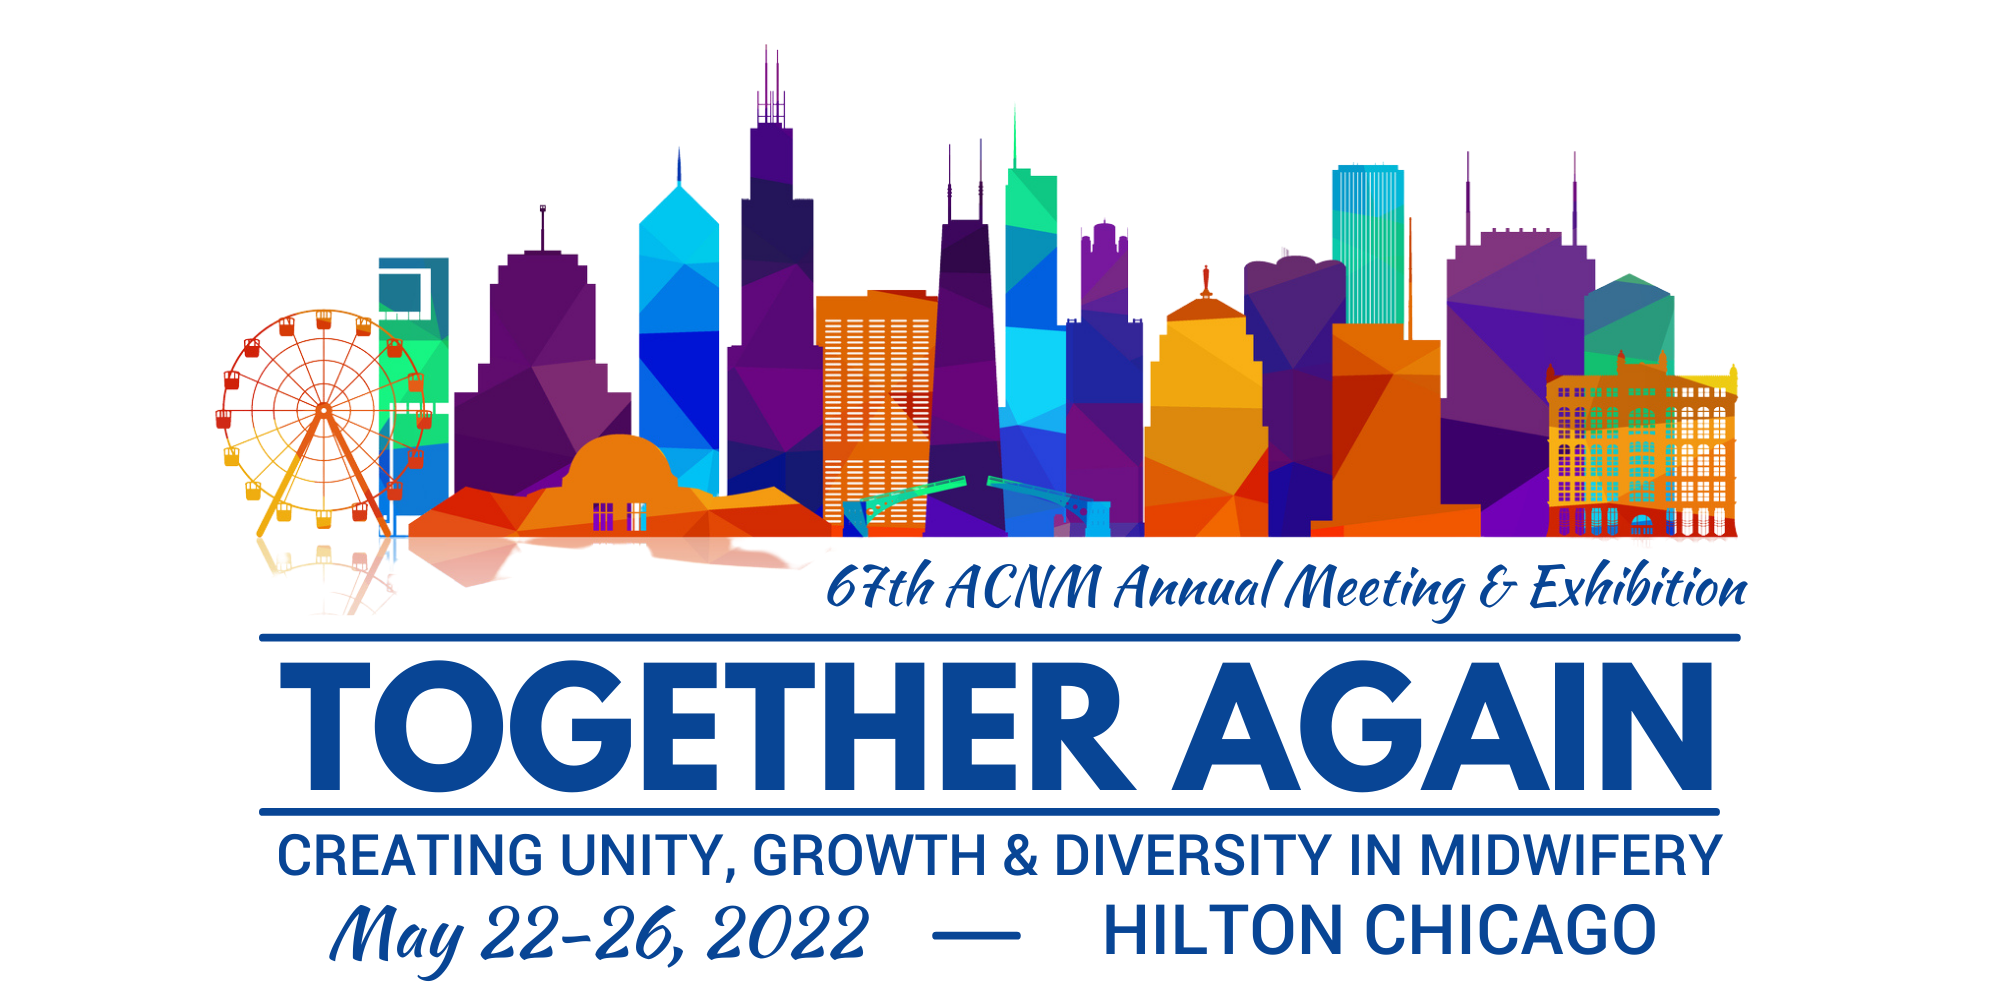 ACNM 67th Annual Meeting & Exhibition